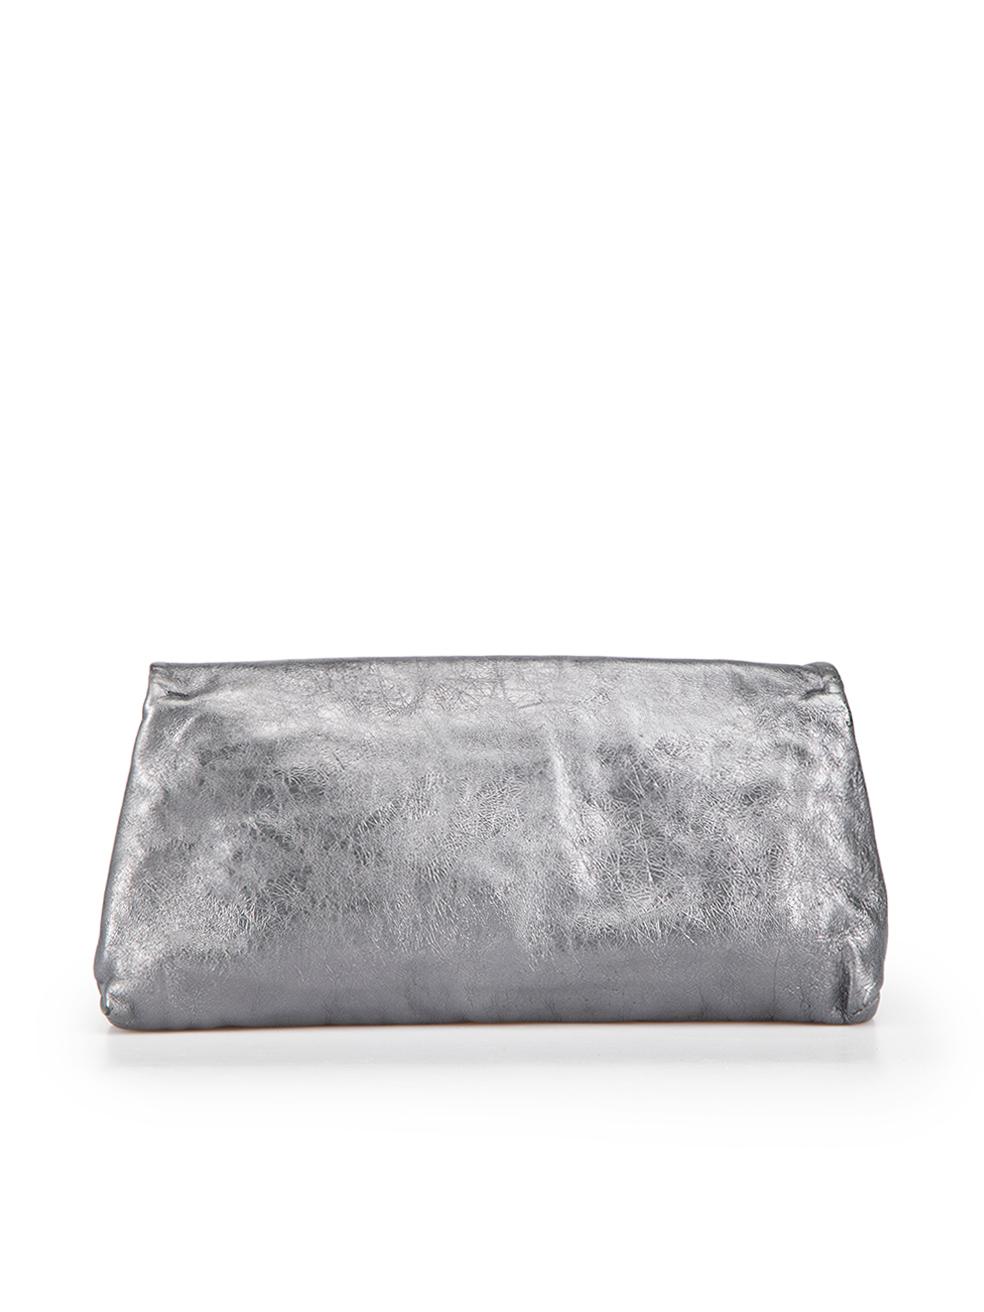 CONDITION is Good. Minor wear to bag is evident. Light wear to leather with abrasion to the surface finish seen near the edges on this used McQ designer resale item. Comes in original dust bag.

 Details
 McQ
 Metallic grey
 Leather
 Medium clutch